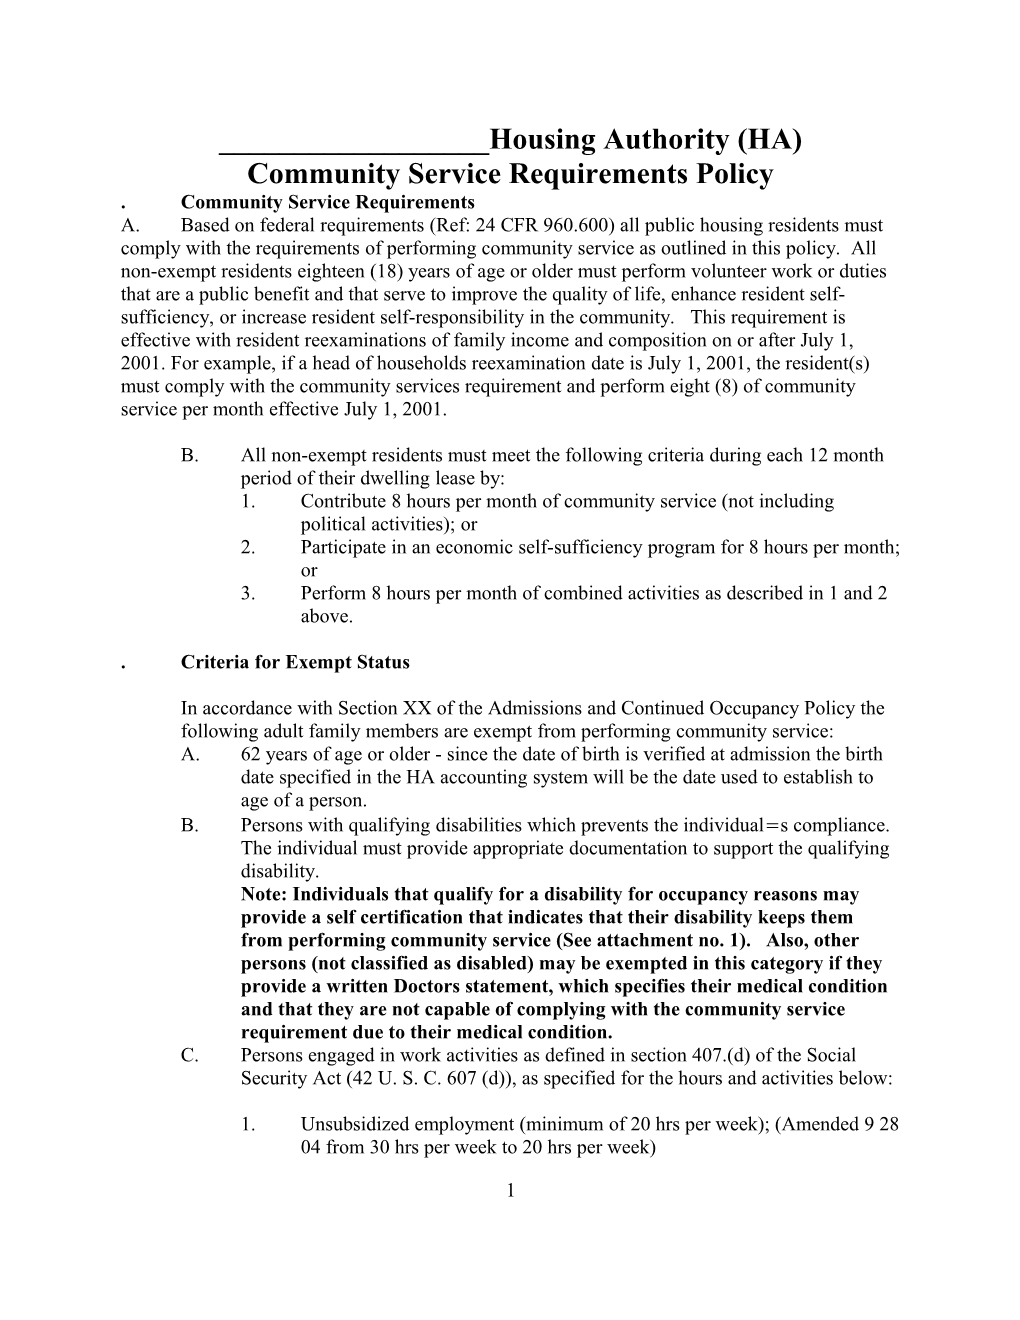 Community Service Requirements Policy